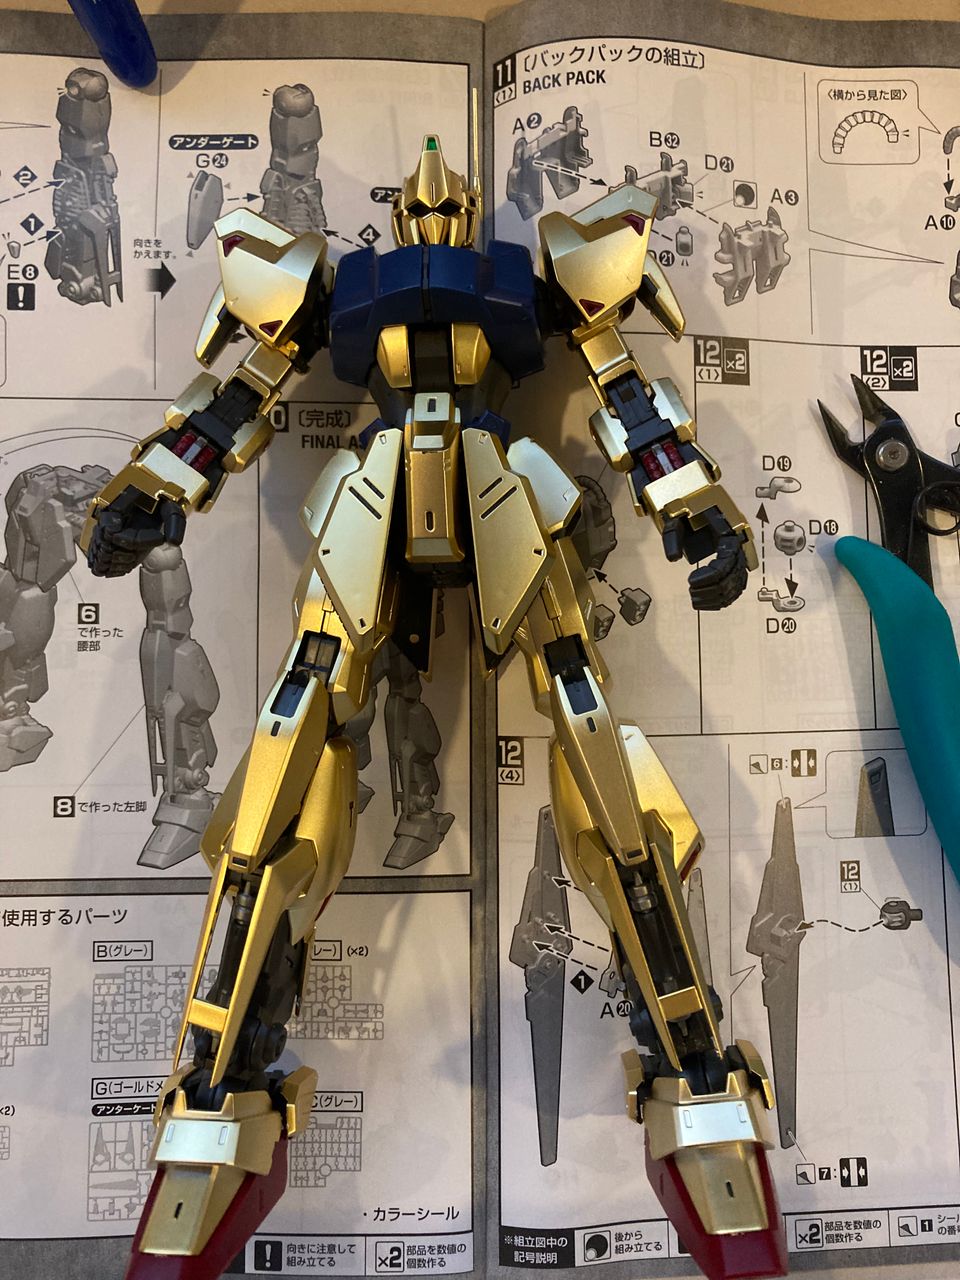 March 2023 - The Hyaku Shiki is really cool